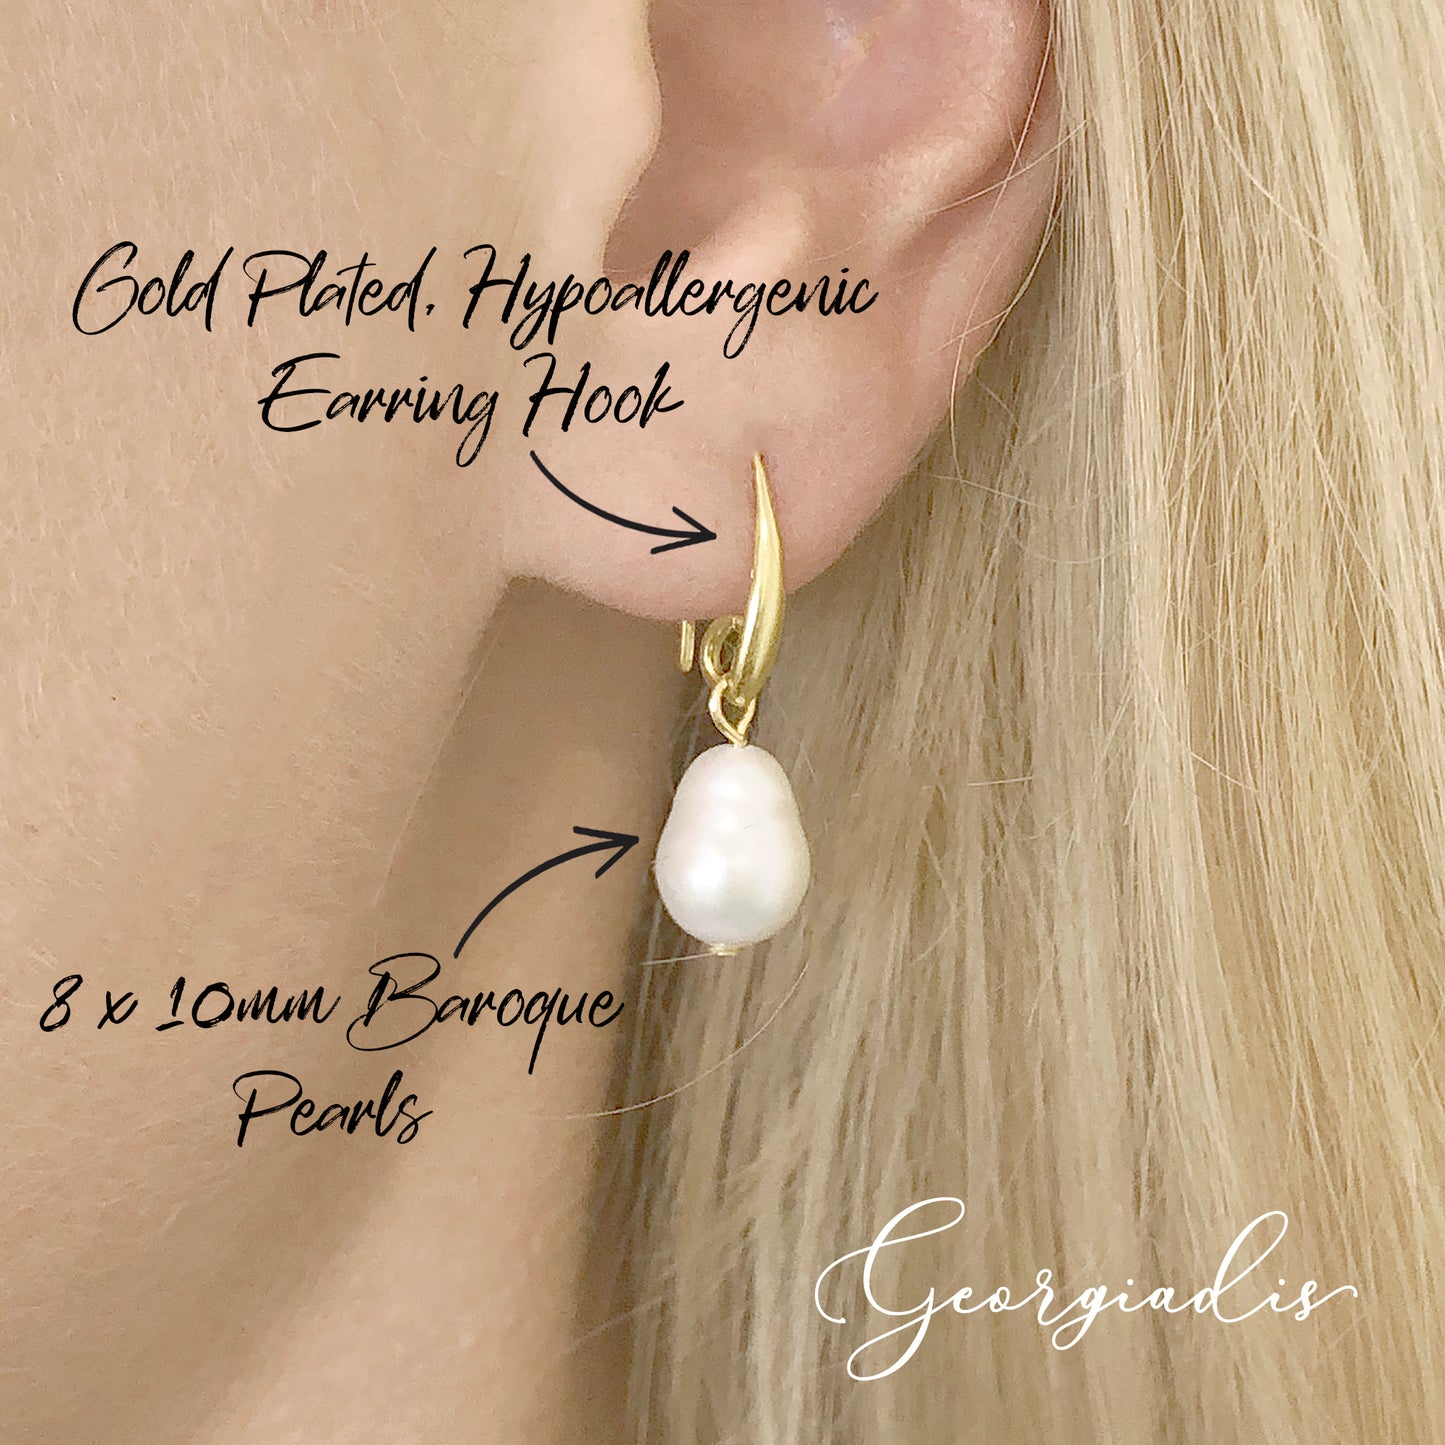 Elegant Baroque Freshwater Pearl Drop Earrings, Grade A High Lustre White Pearls. Symbol of Beauty, Wealth, Prosperity and Intuition, Gift Box.